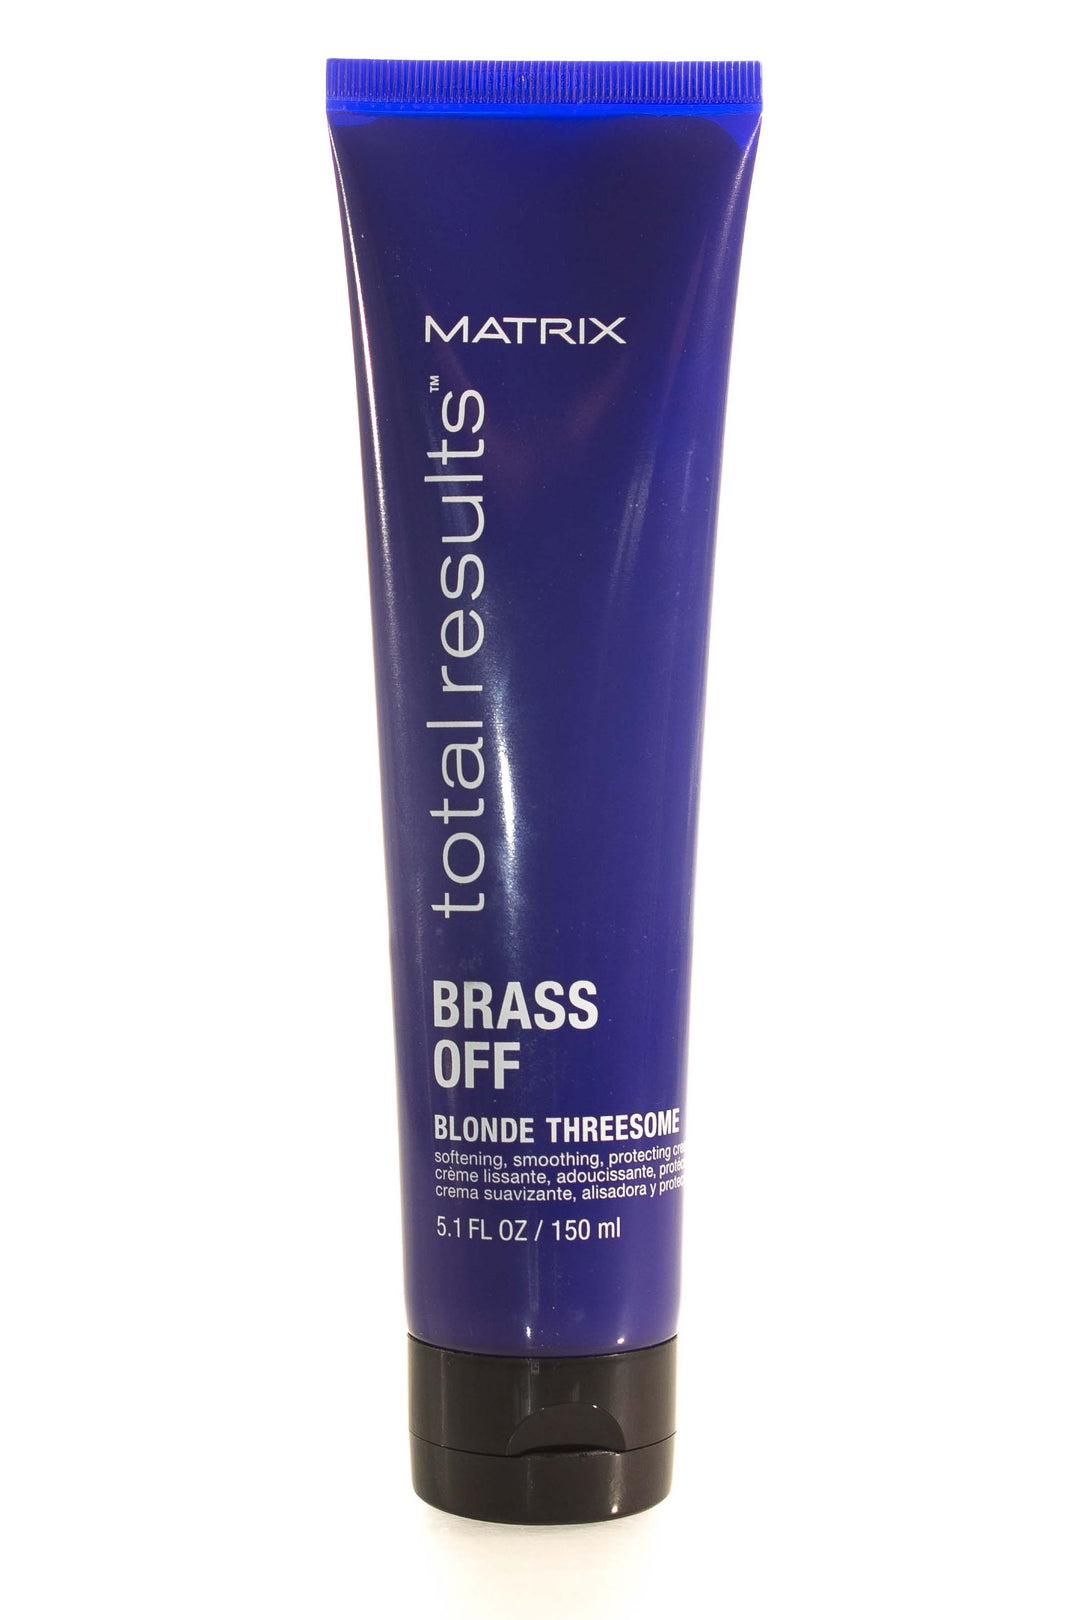 Product Image: Matrix Total Results Brass Off Blonde Threesme Leave-In - 150ml